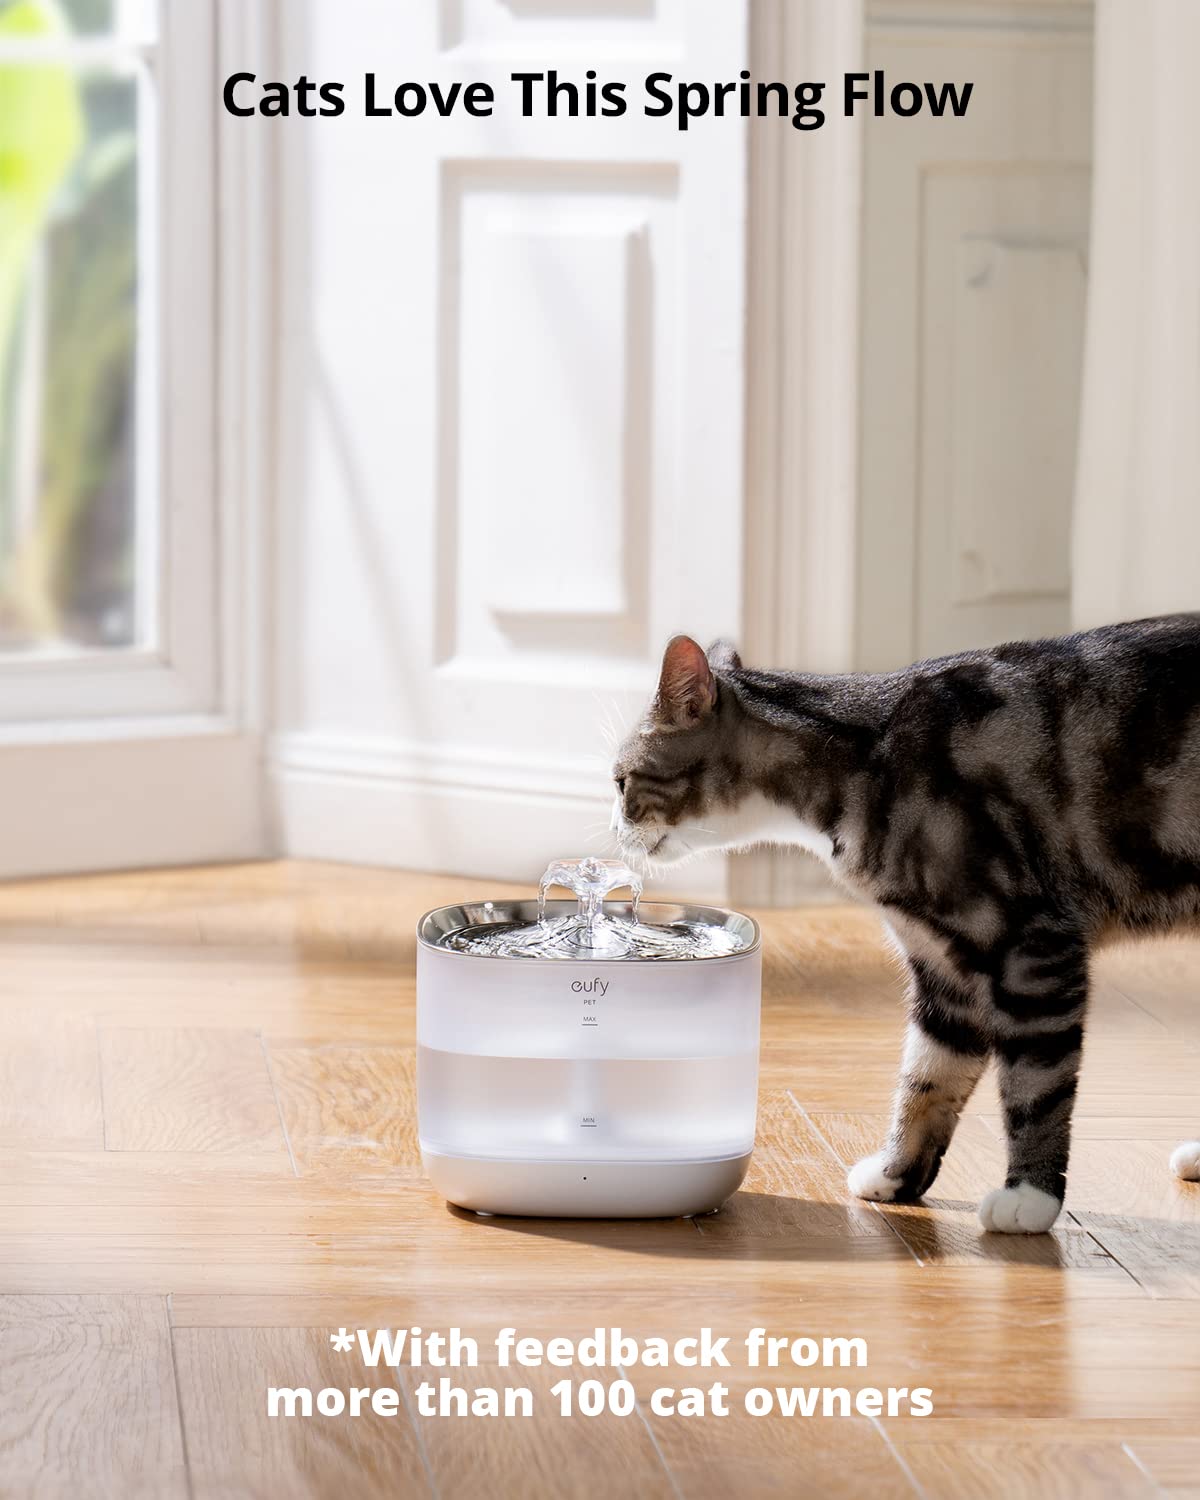 Stainless Steel Automatic Pet Water Dispenser - Perfect for Cats and Dogs -  Easy to Use and Clean